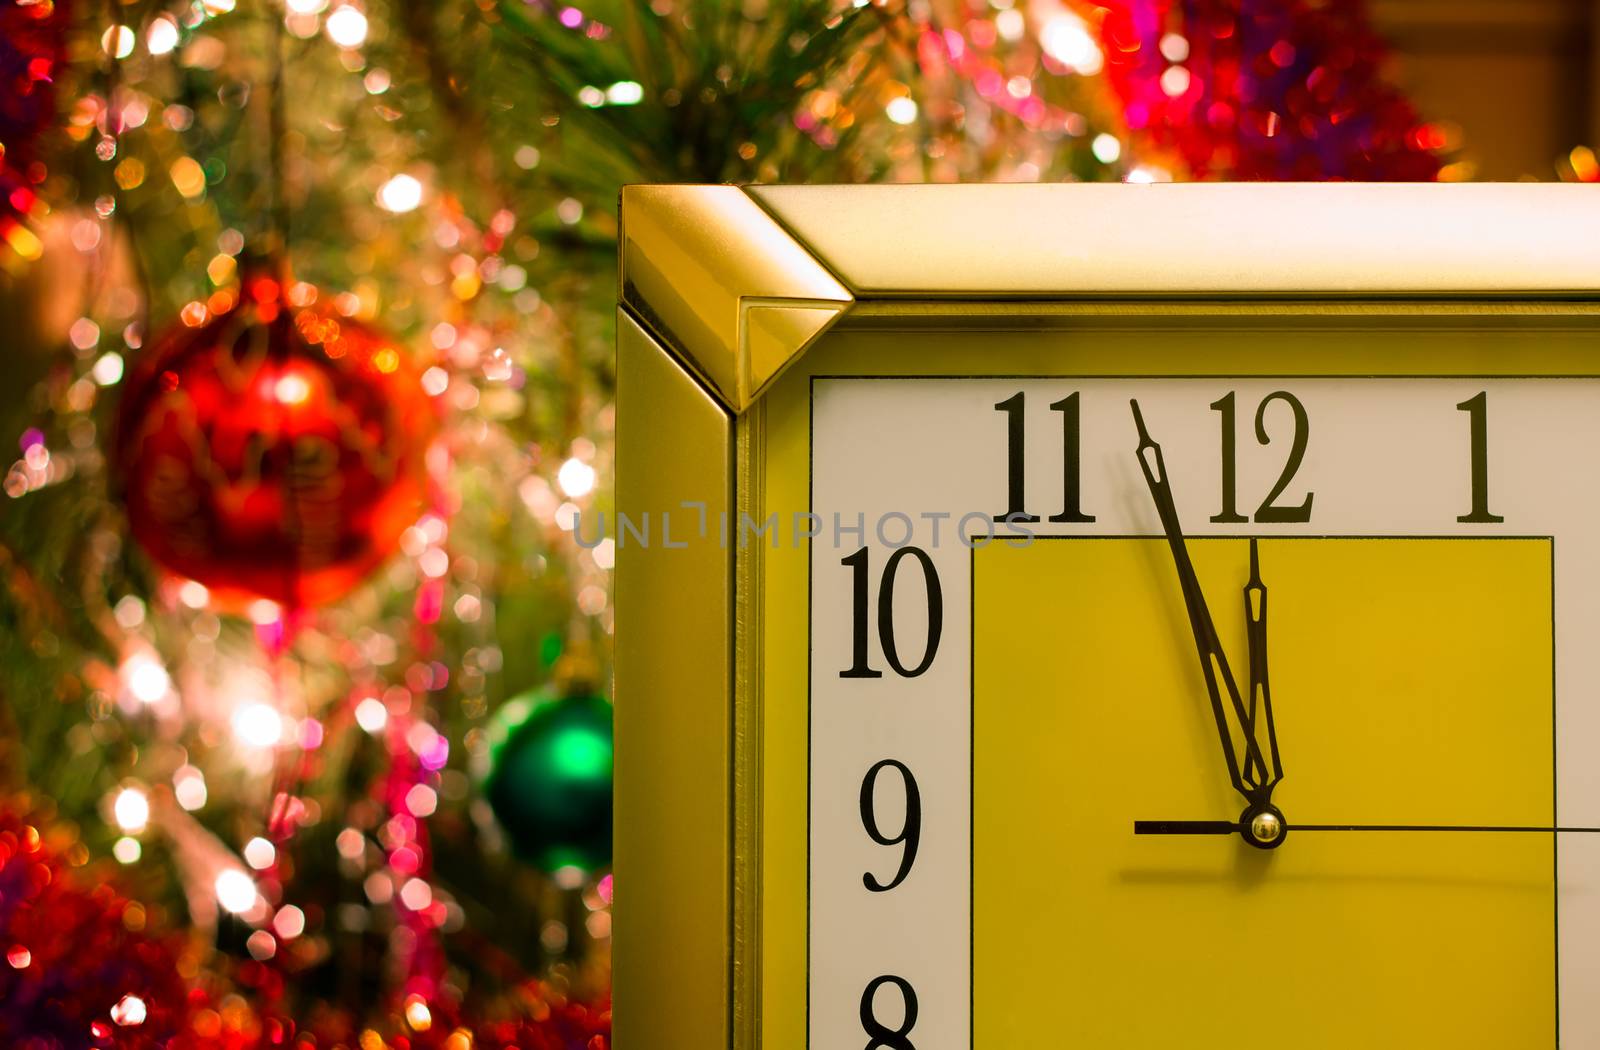 
Beautiful watch around the Christmas tree show that before the arrival of the New year is five minutes.